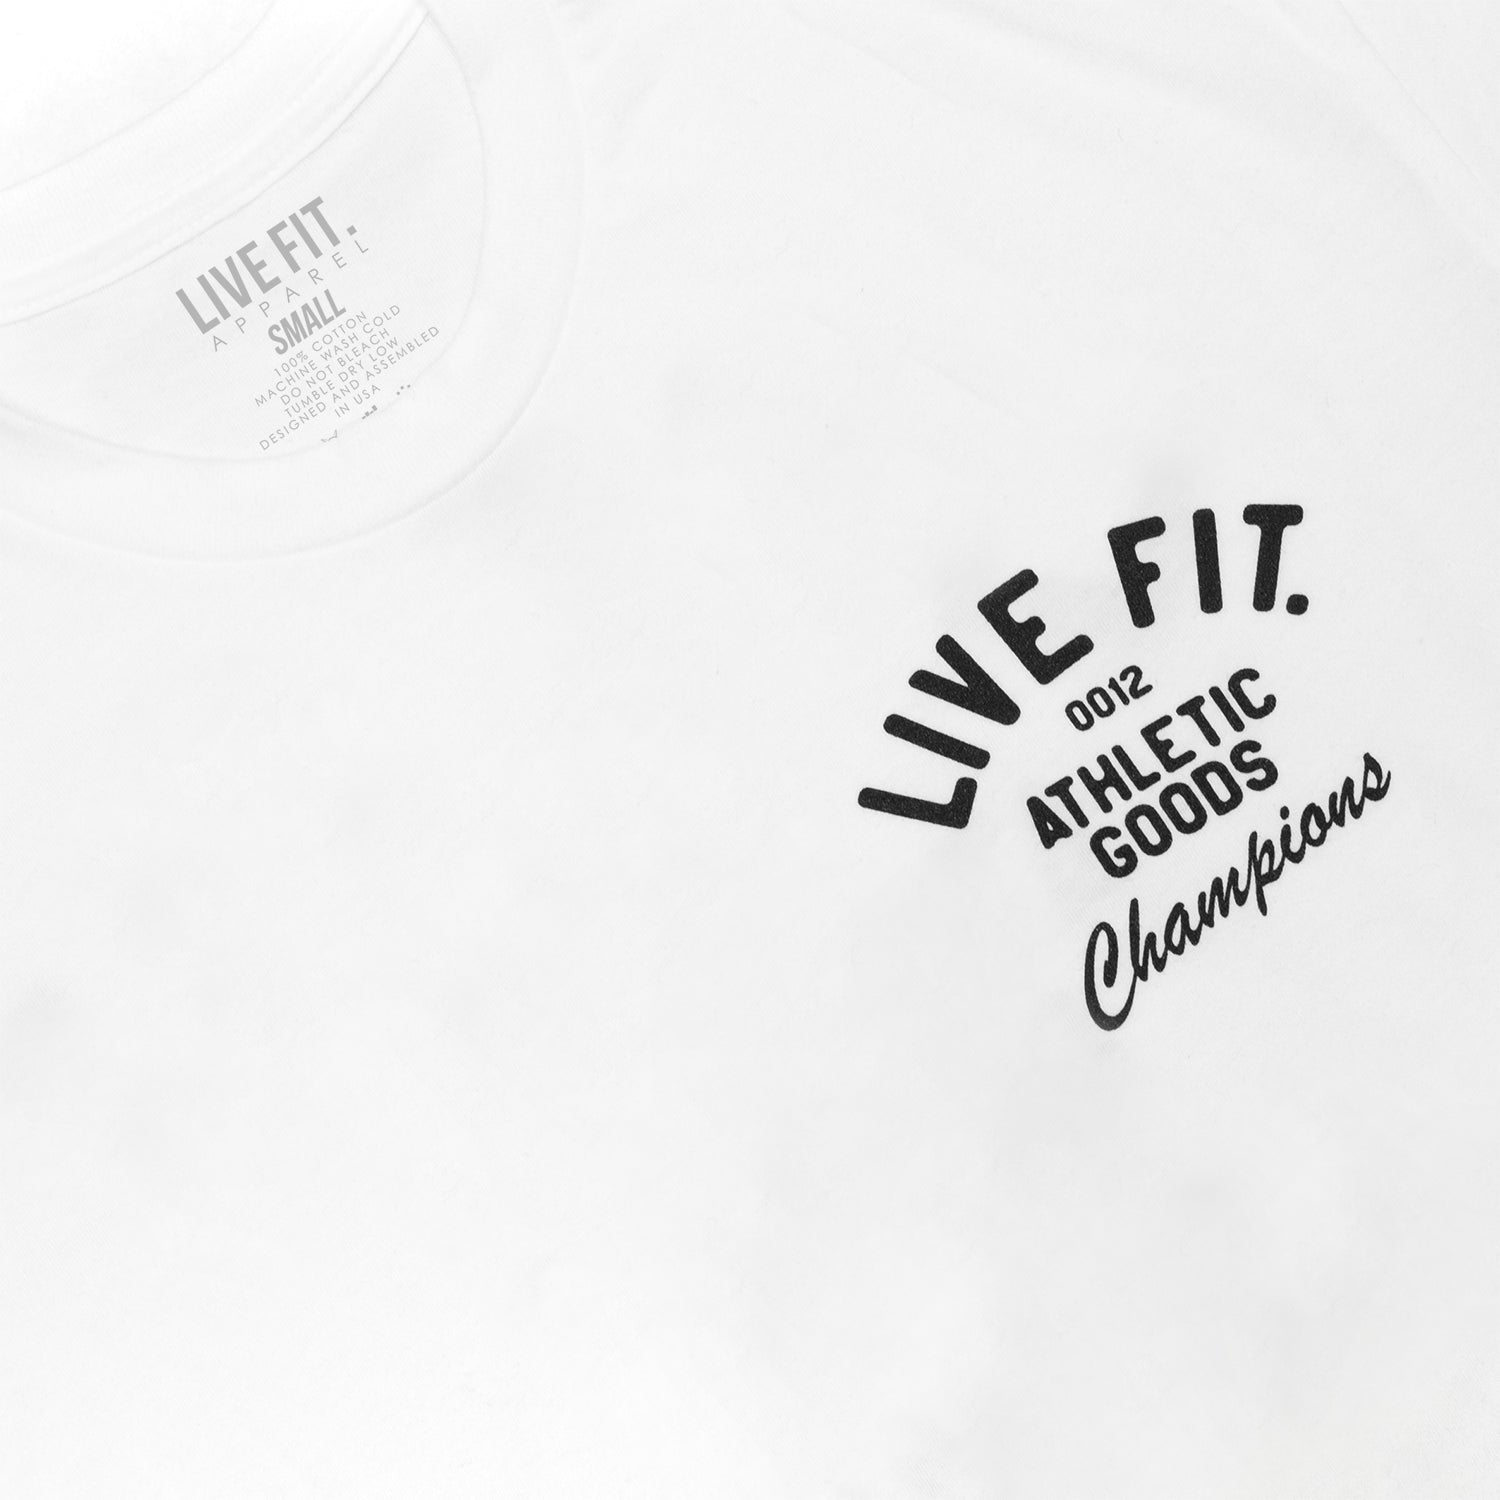 Athletic Goods Tee - White, Live Fit Apparel